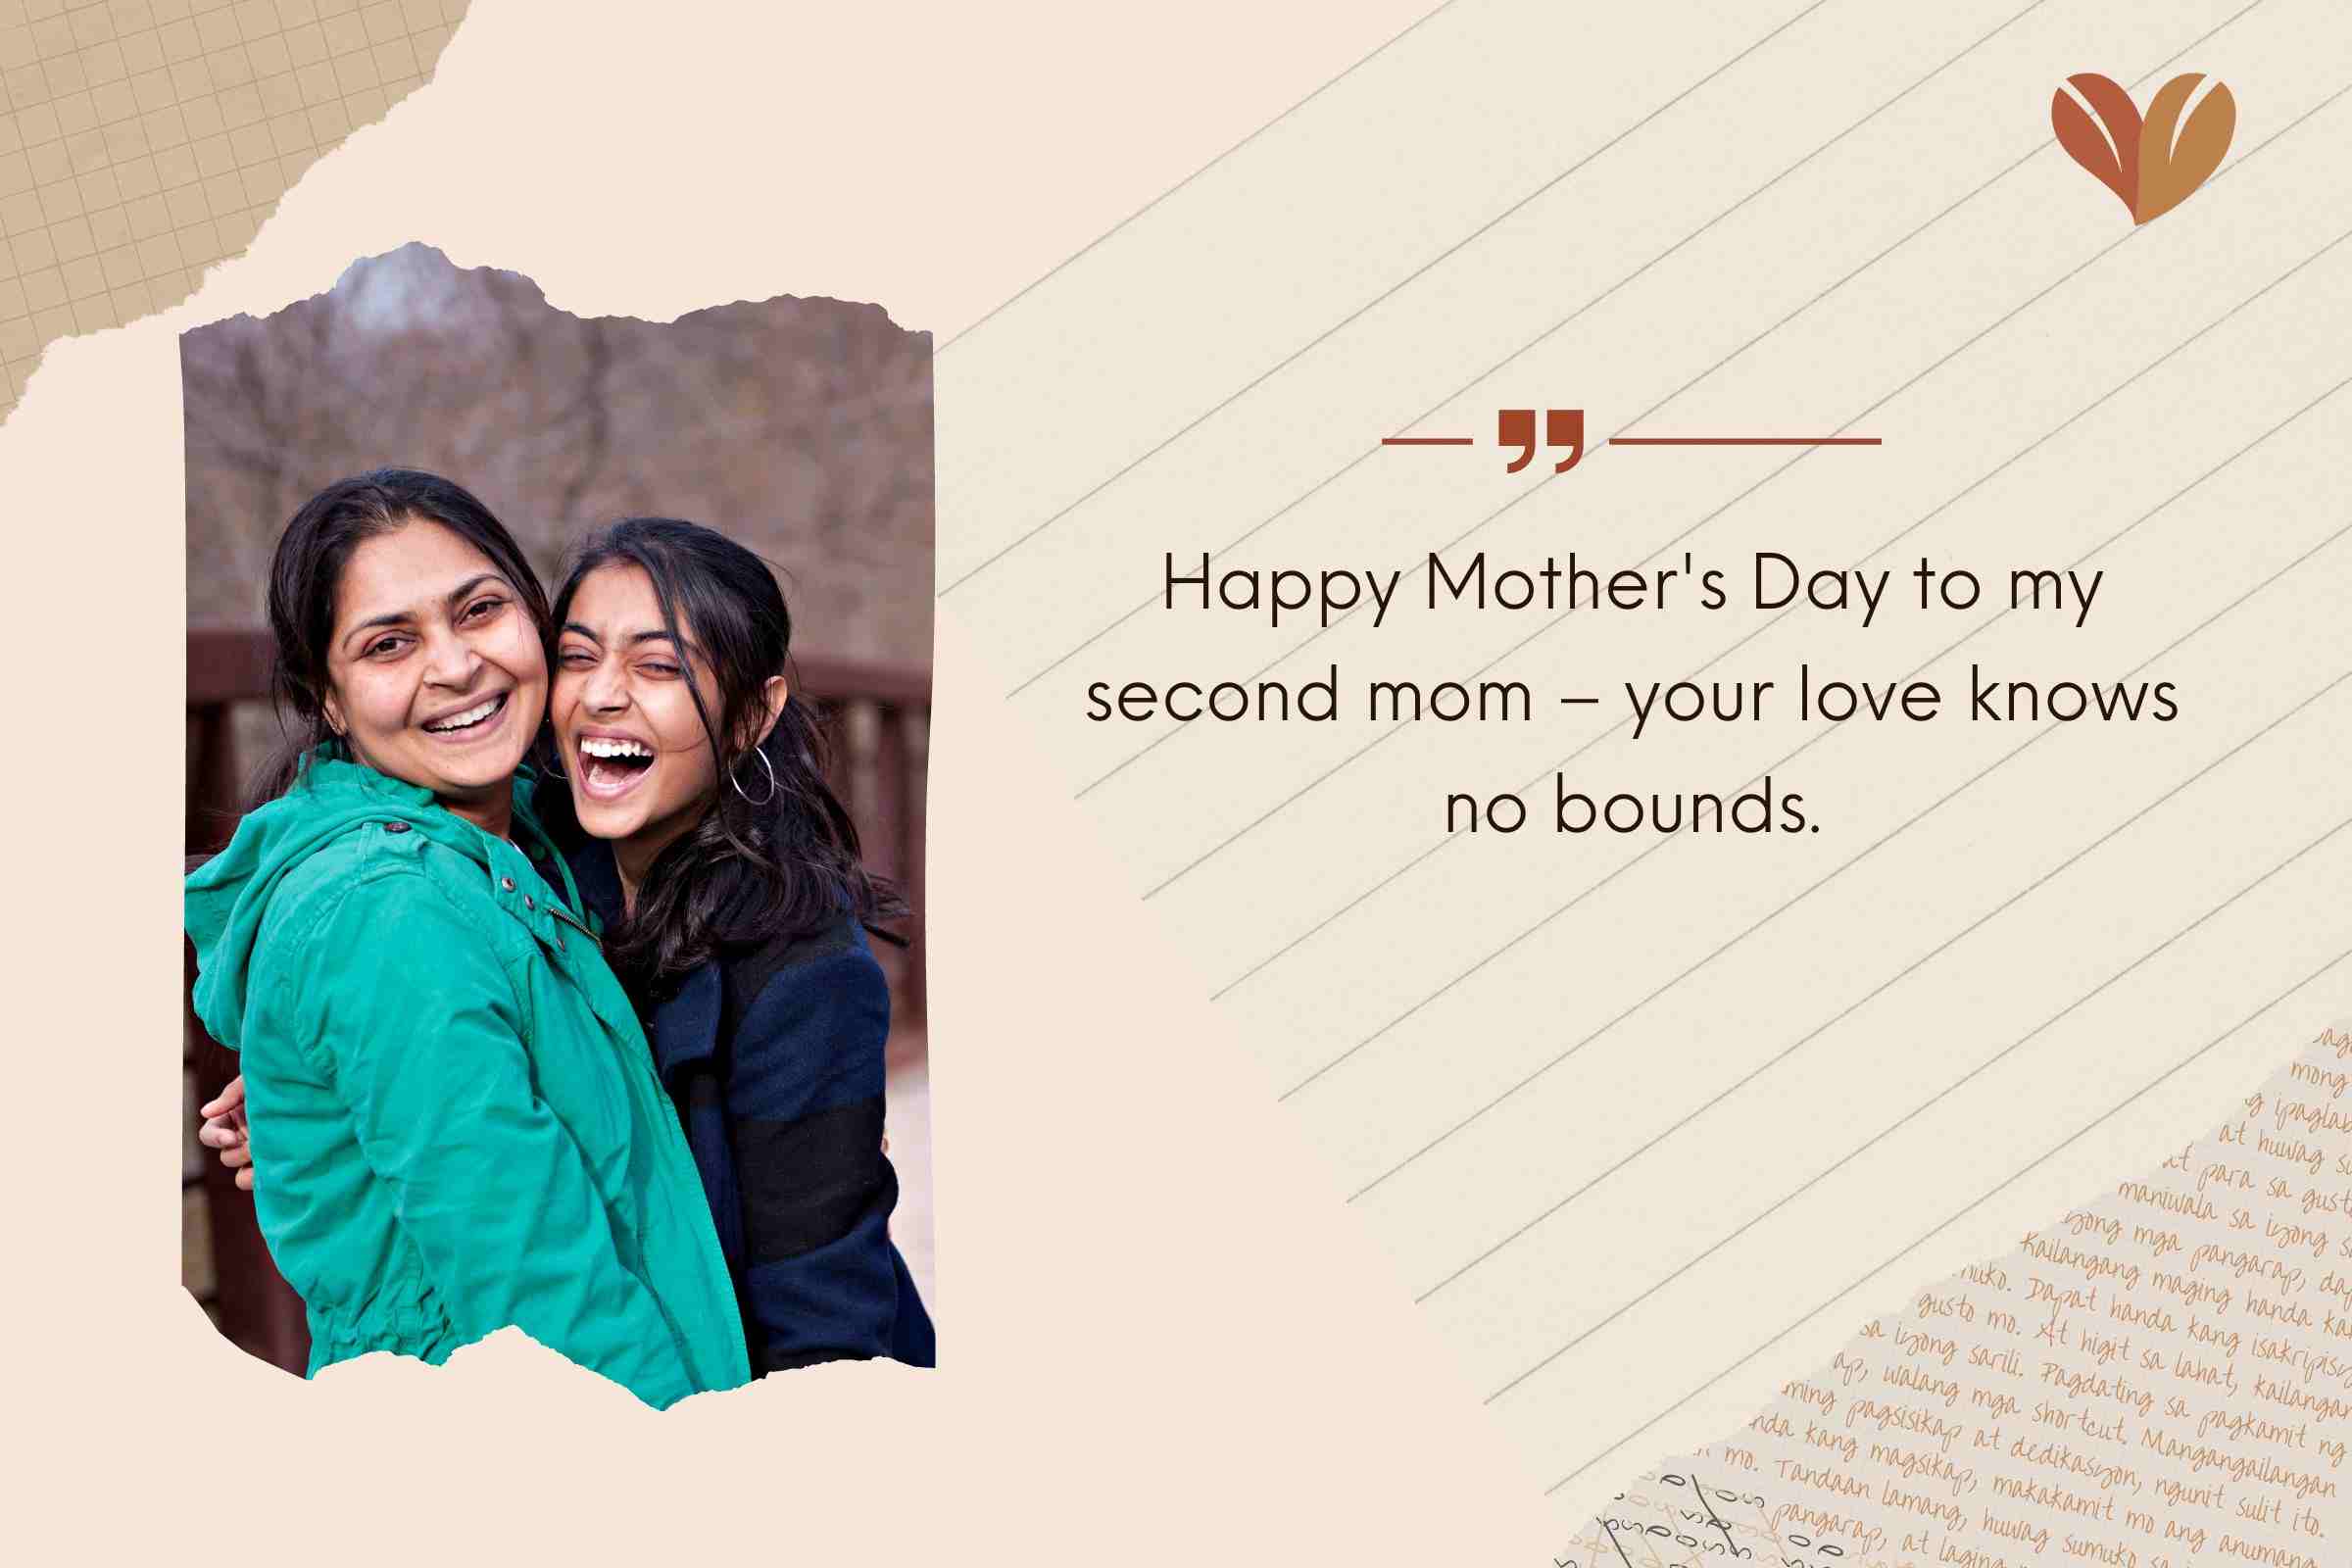 Mother's Day messages for your mother-in-law - Happy Mother's Day to my second mom – your love knows no bounds.